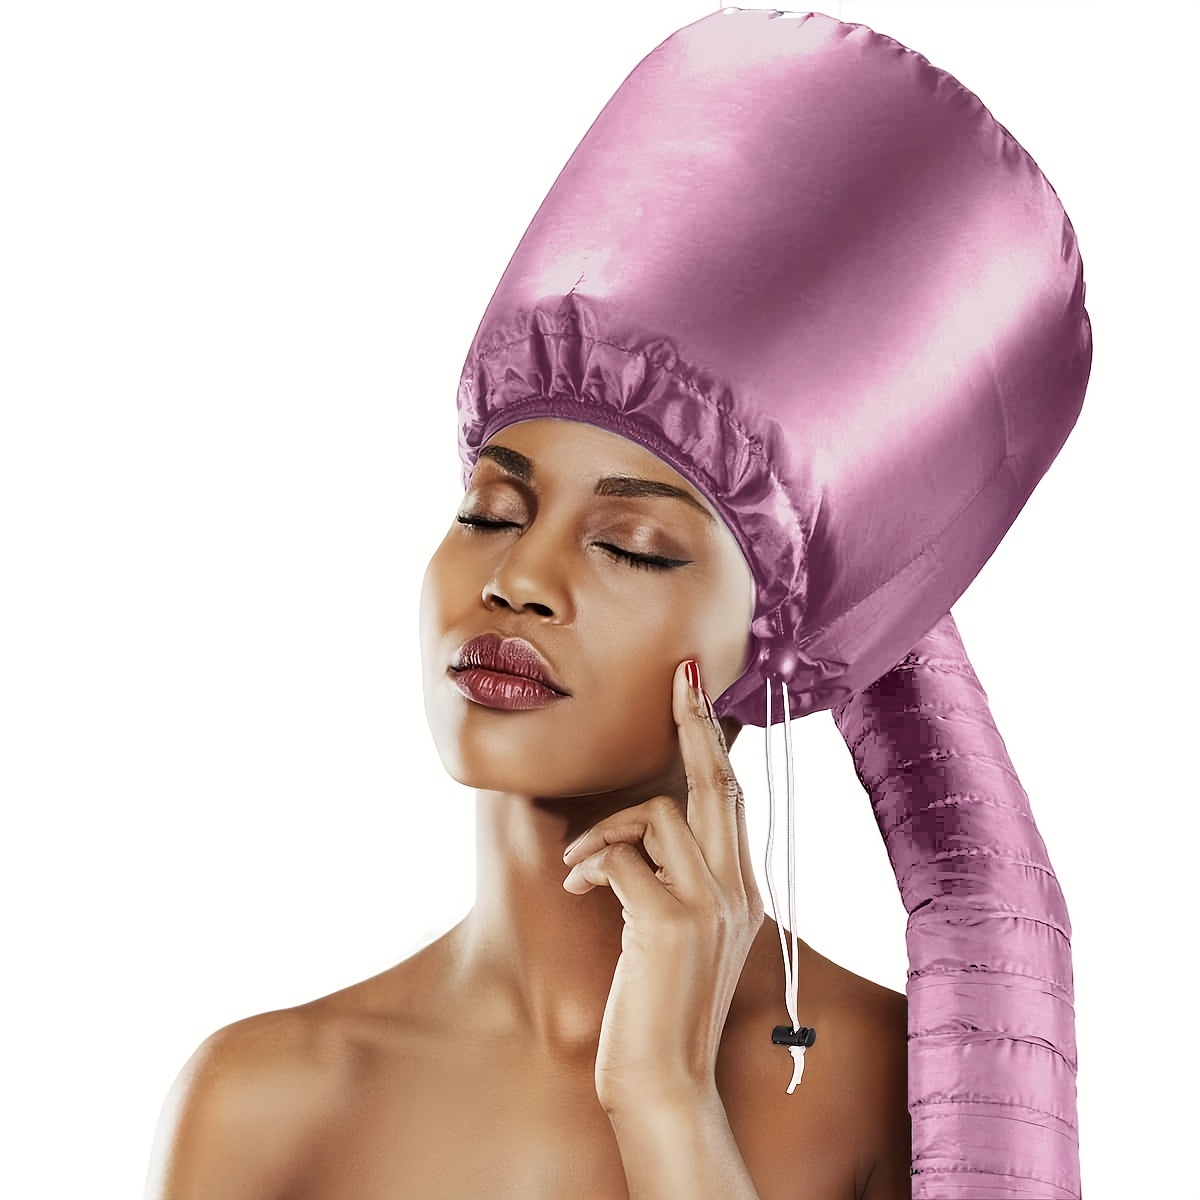 

Soft Bonnet Hood Hair Dryer Attachment With Headband, Hooded Hair Dryer Cap Used For Hair Styling, Deep Conditioning And Hair Drying